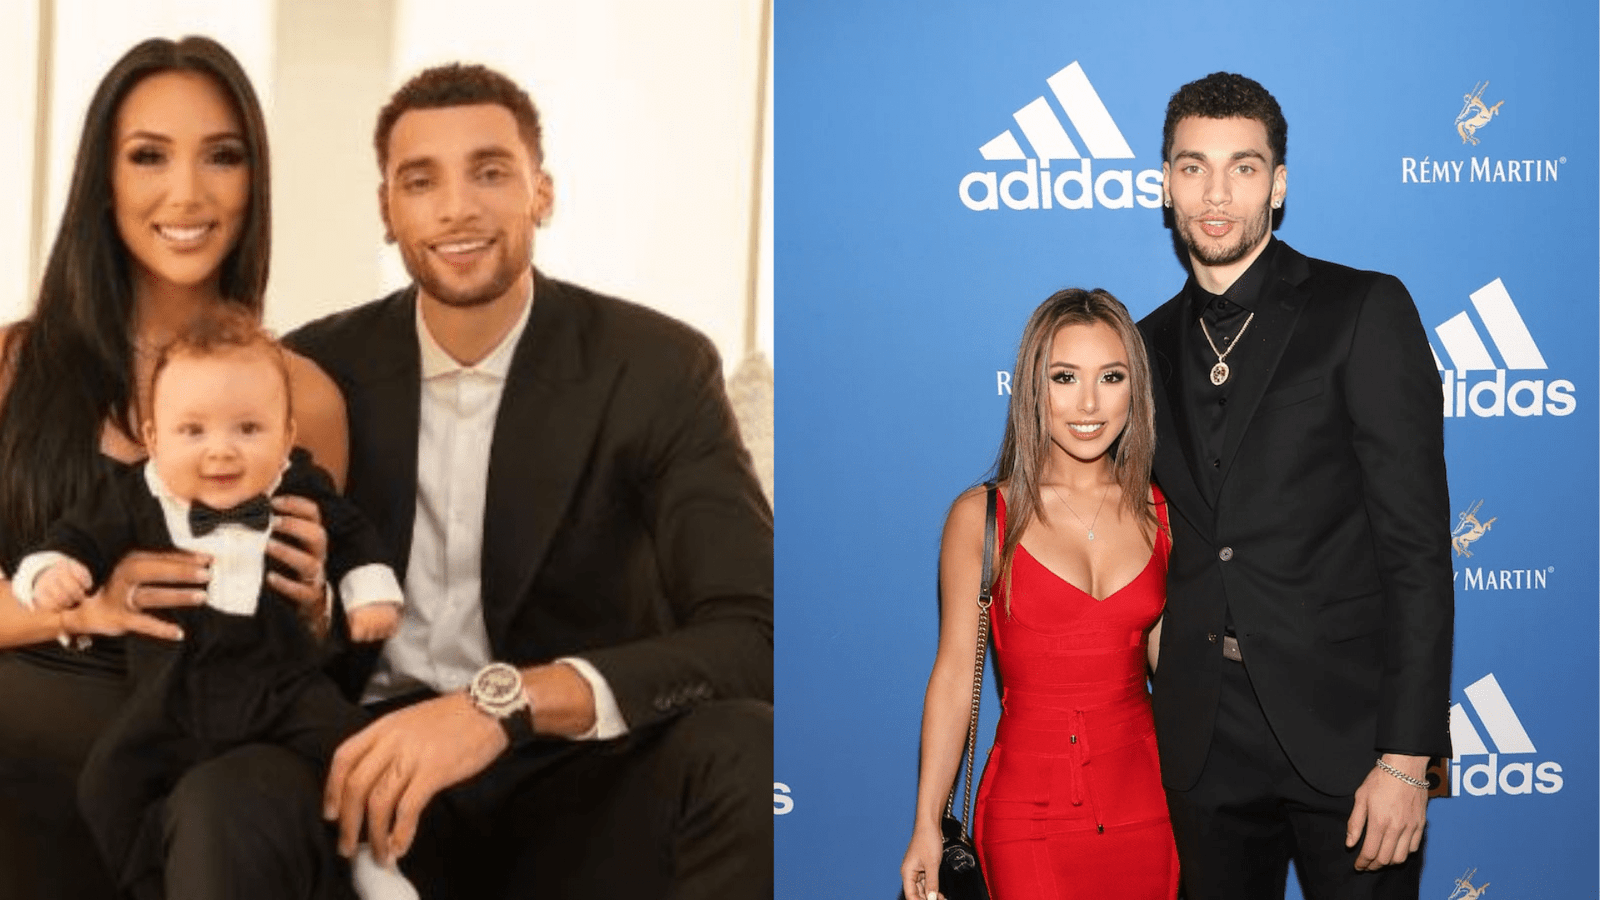 Skylar Vox and Zach LaVine’s Relationship – All You Need to Know 